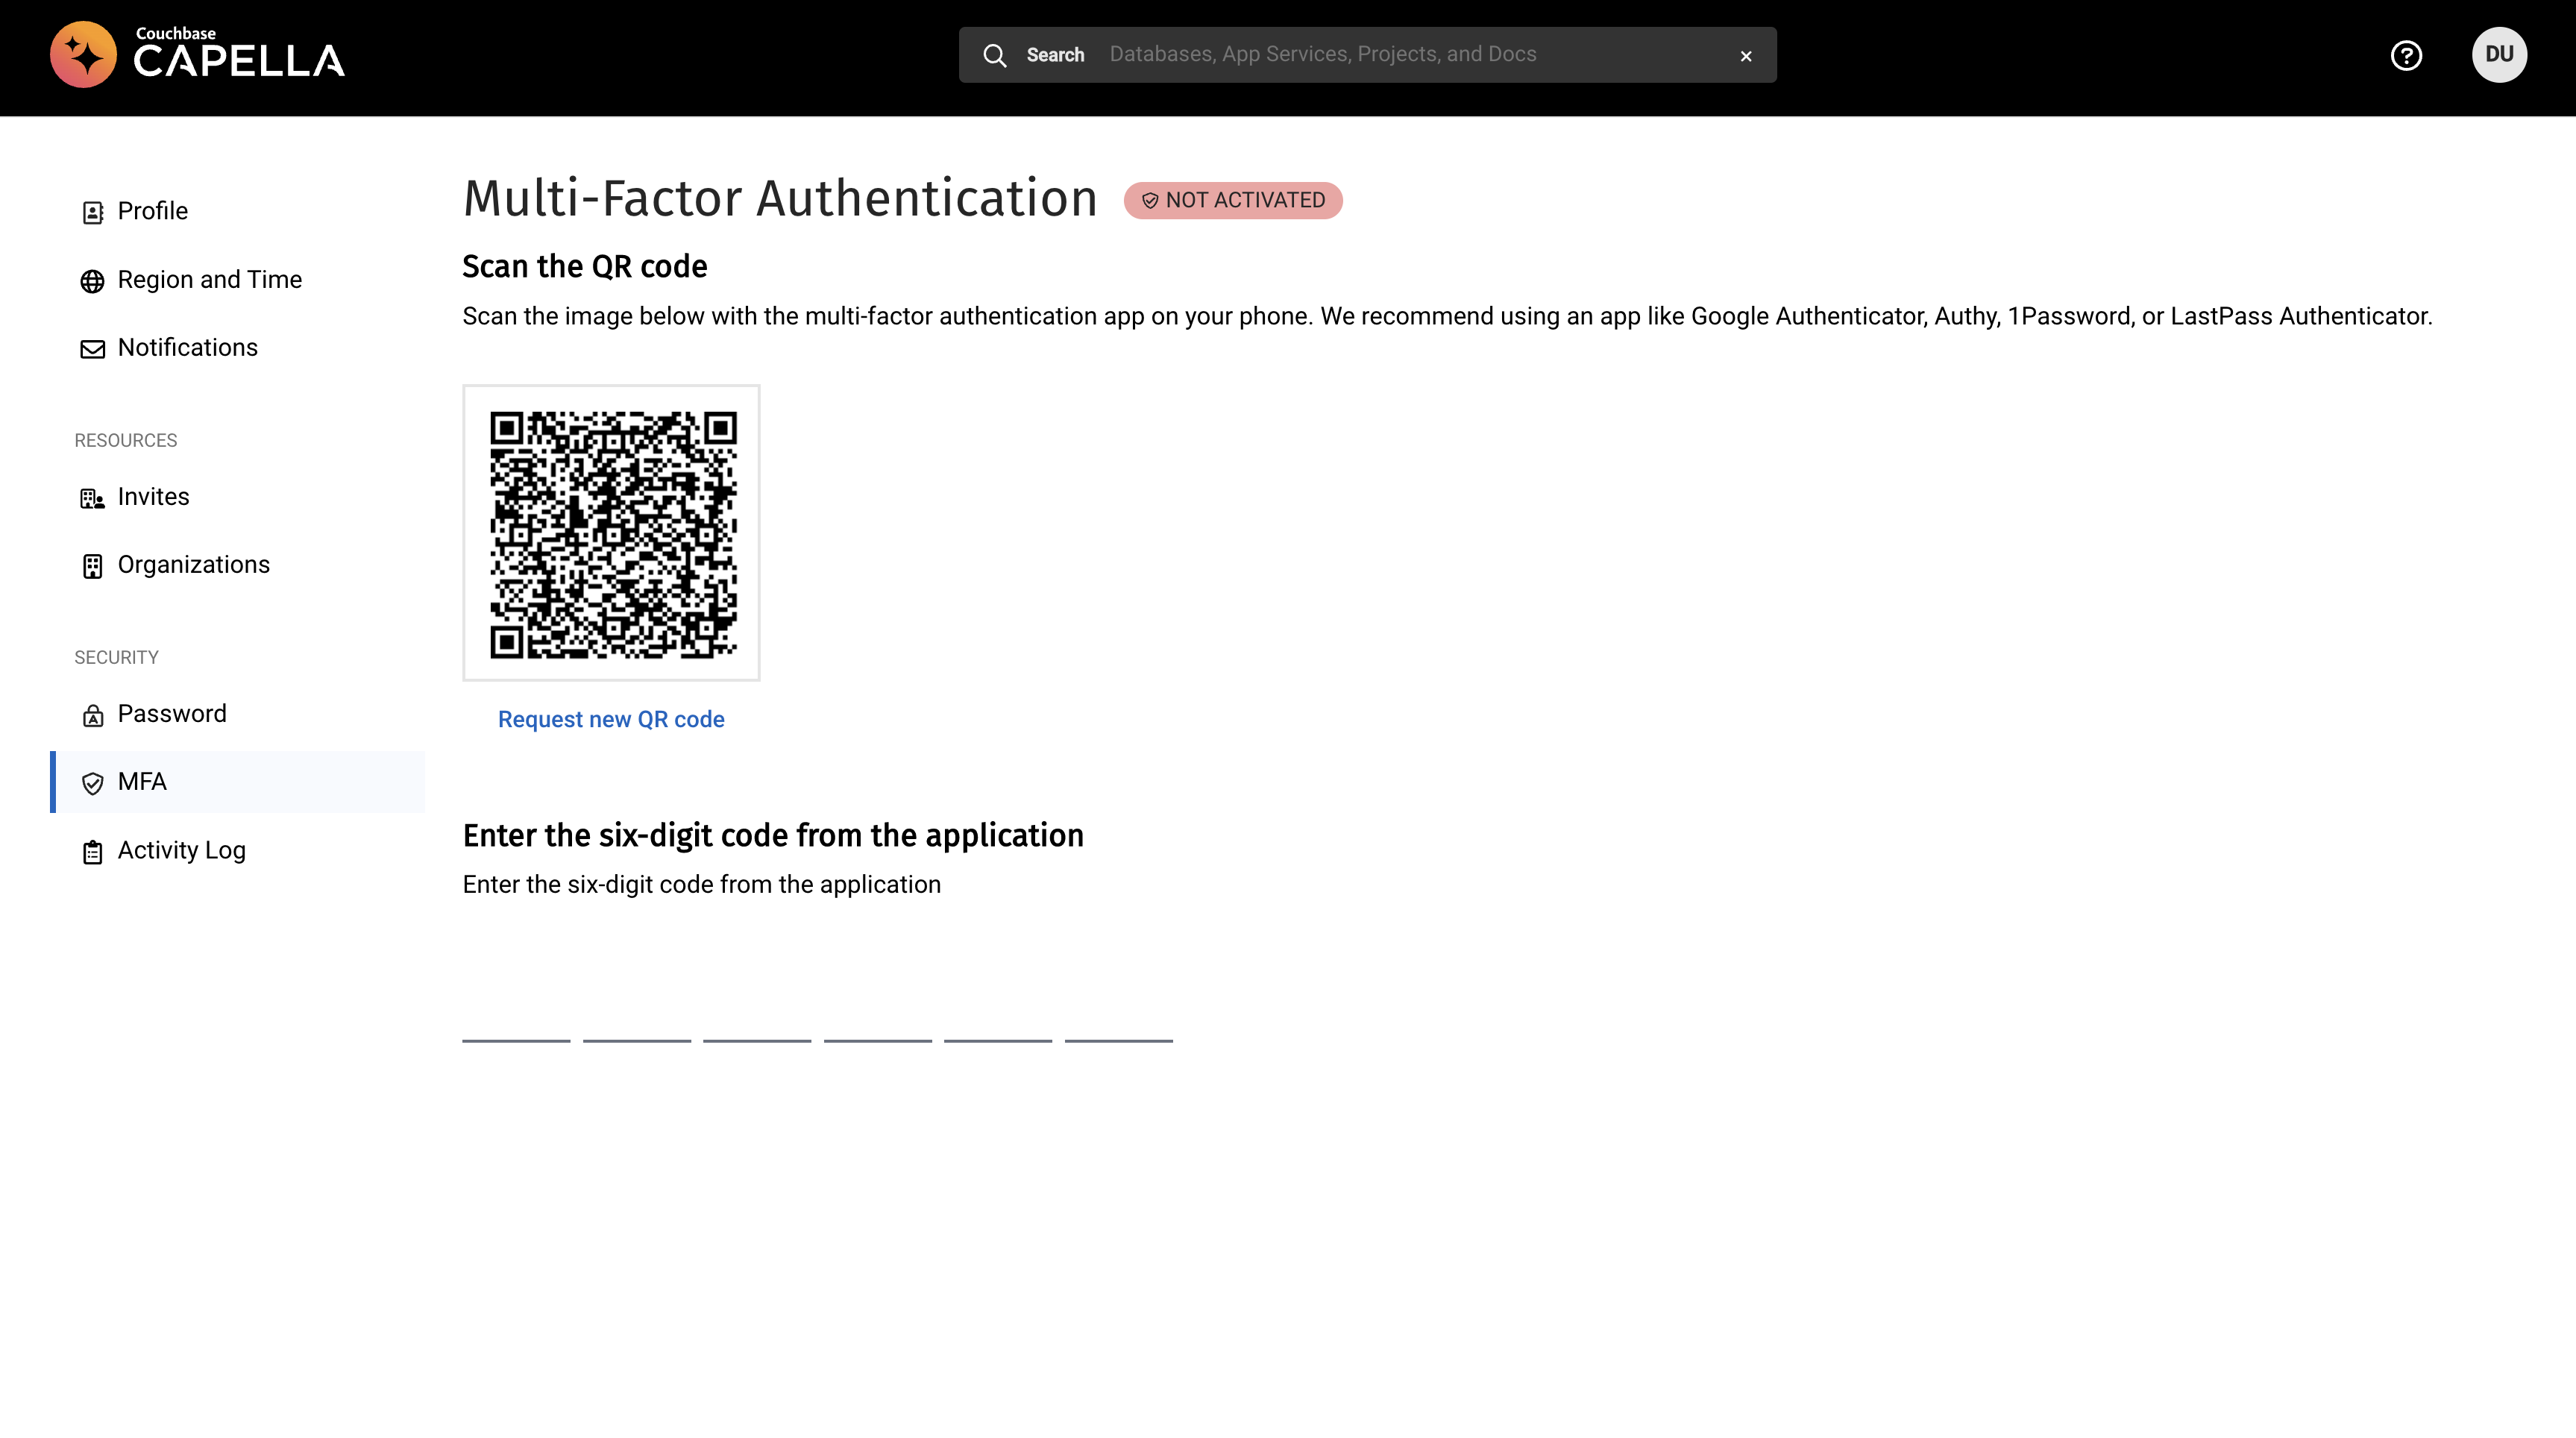 Scan the 2D barcode from your cellphone’s MFA app.